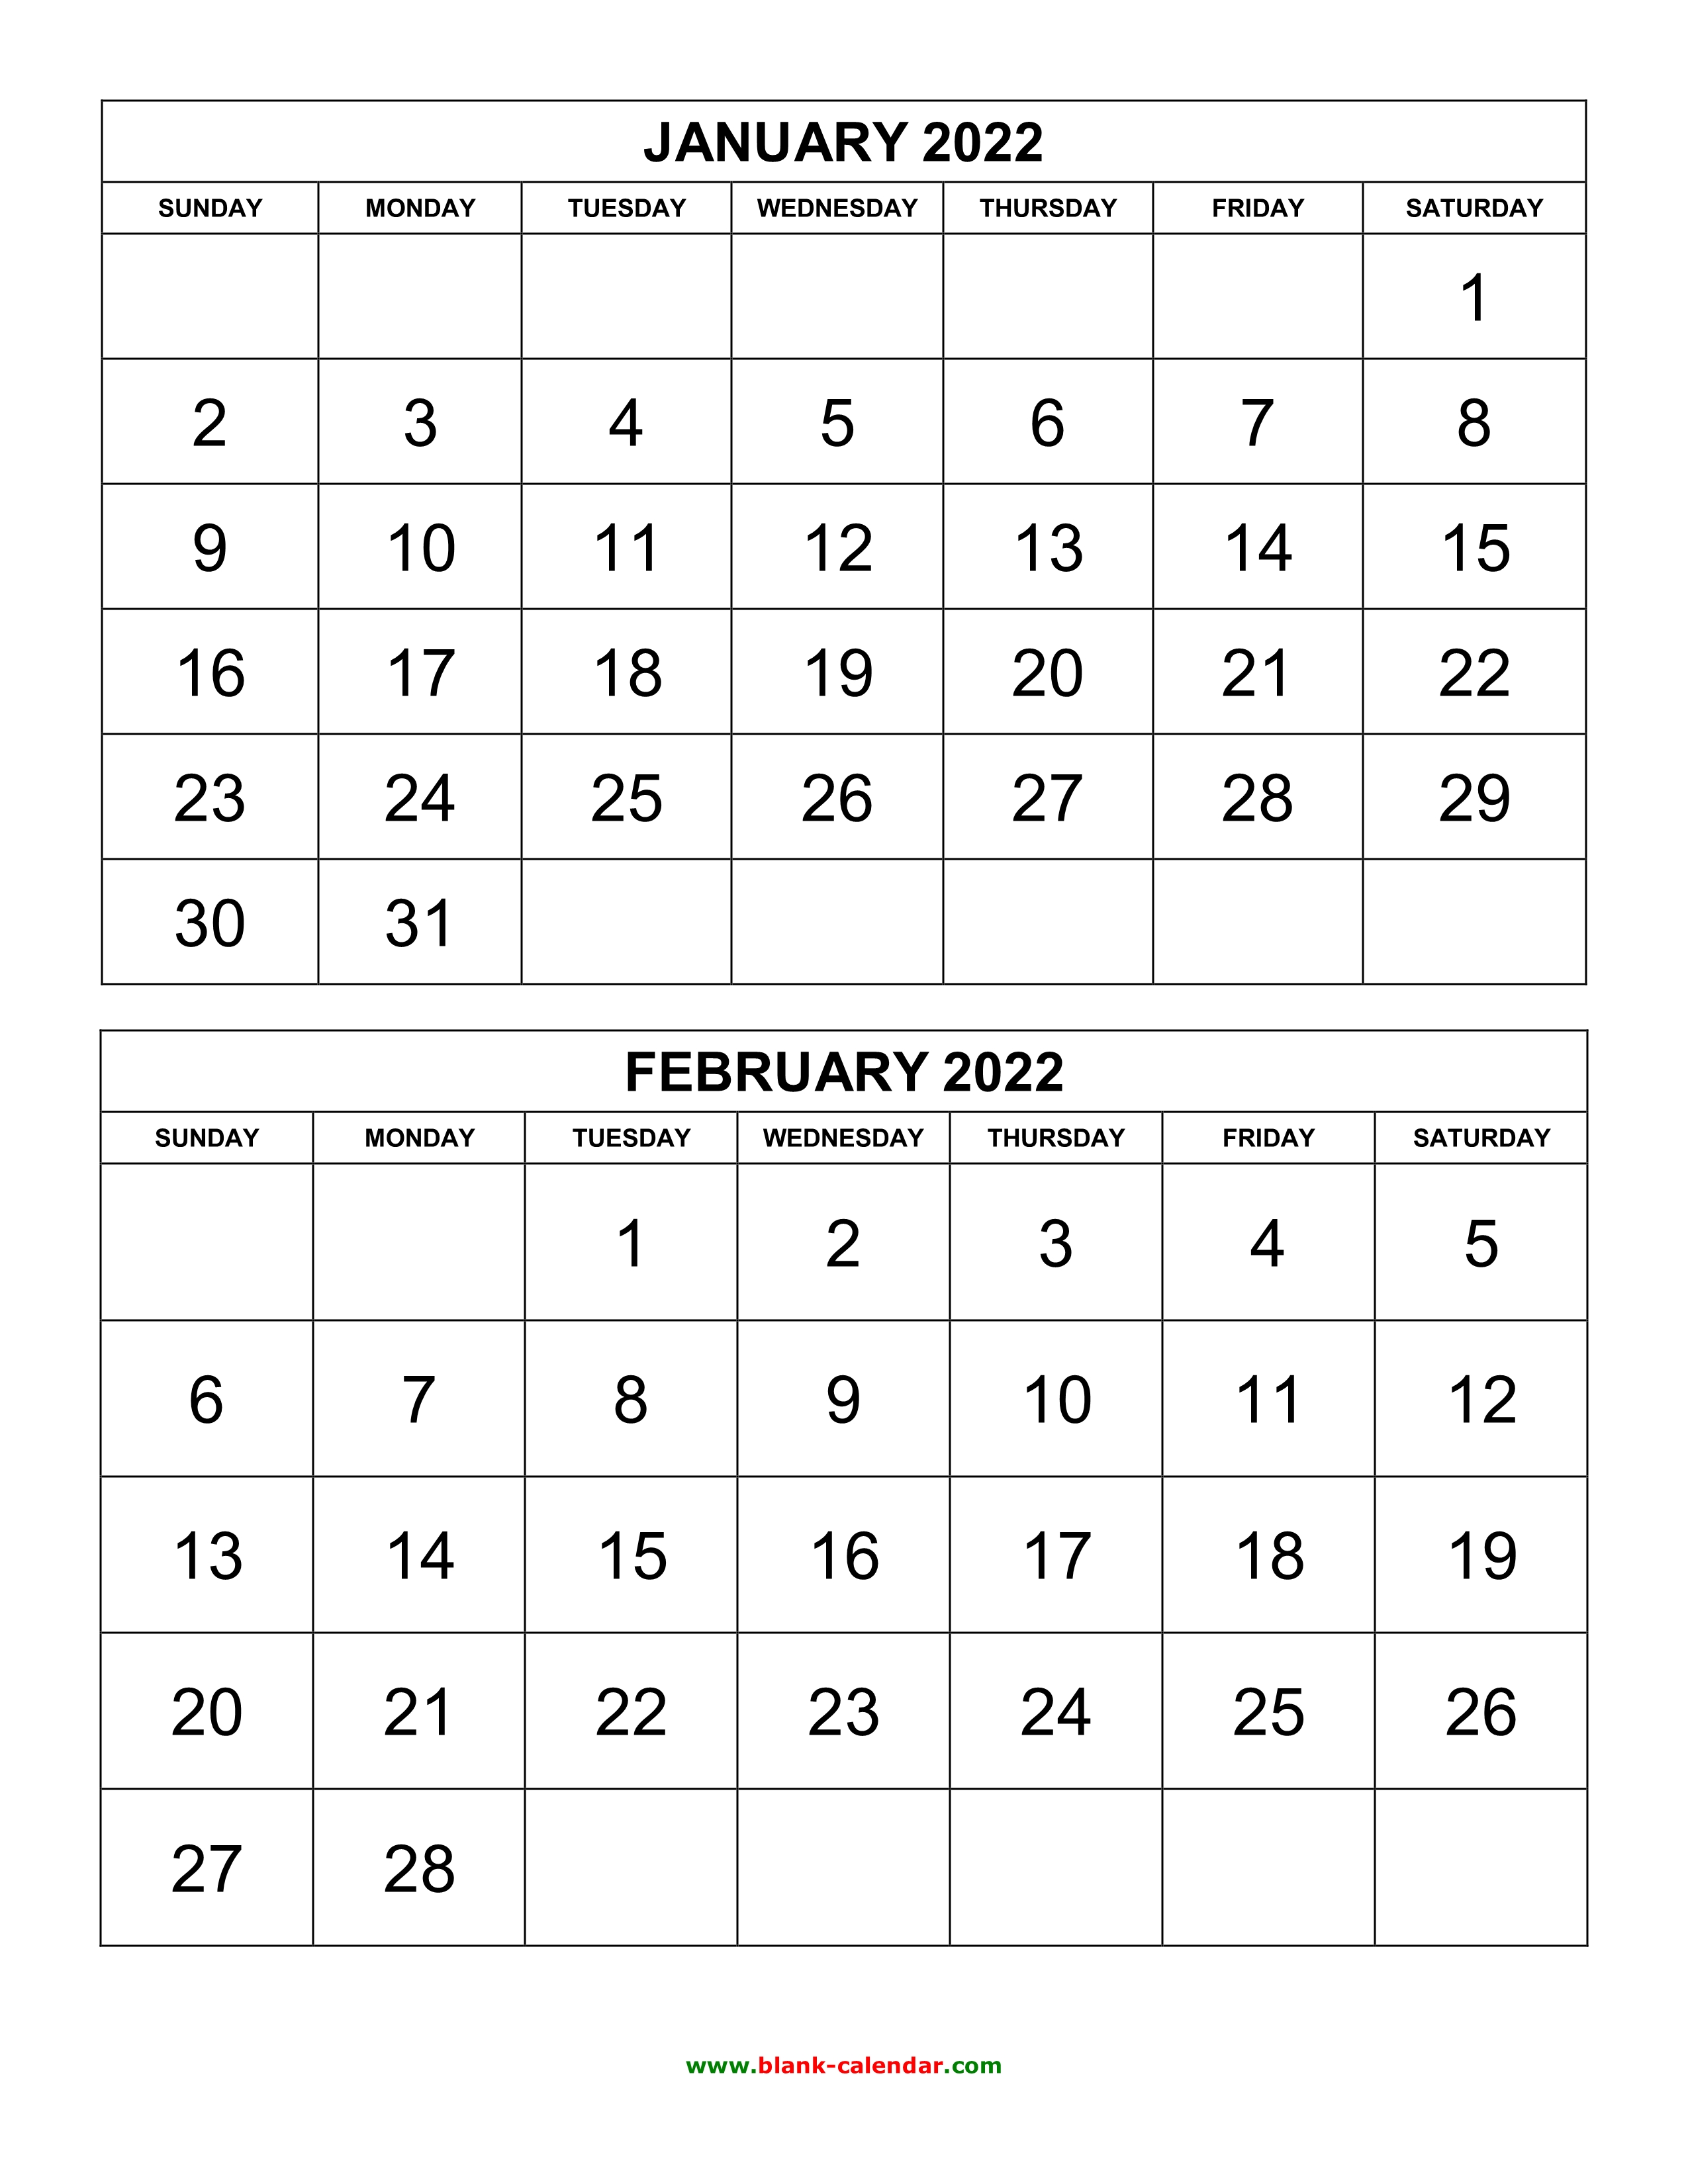 Free Download Printable Calendar 2022, 2 months per page, 6 pages